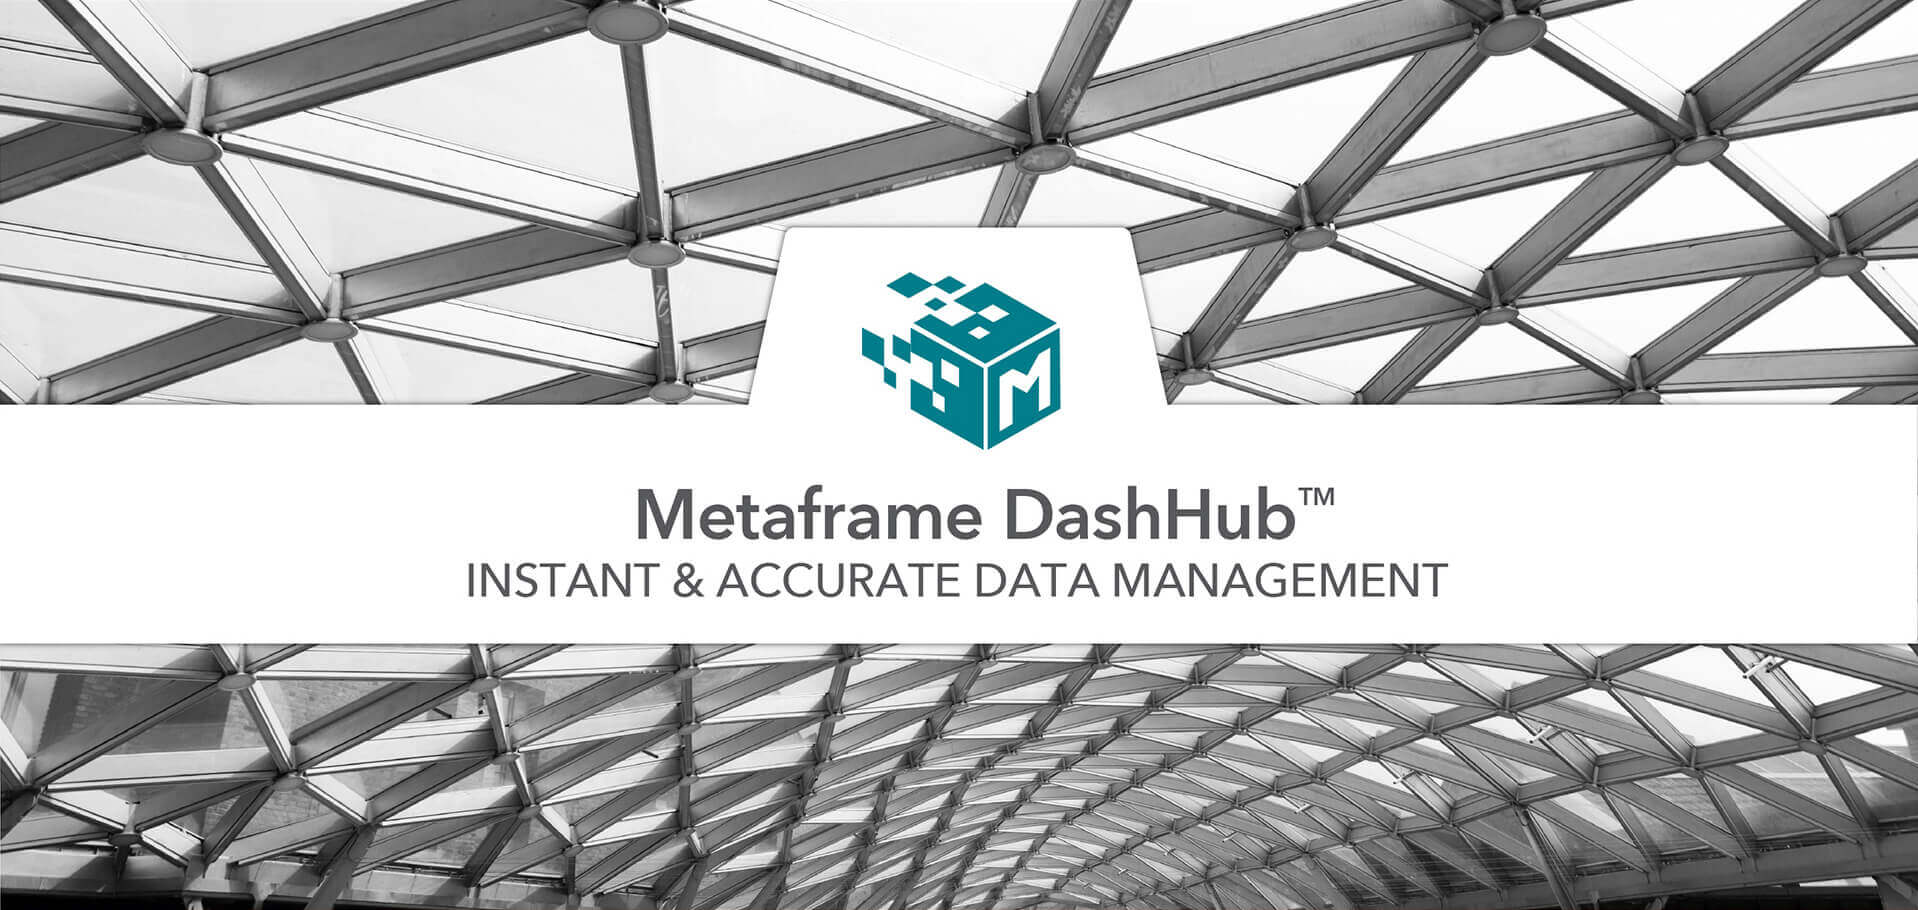 Metaframe cube logo framed by white banner against background of grey steel, lattice like structure. Metaframe DashHub - Instant and accurate data management